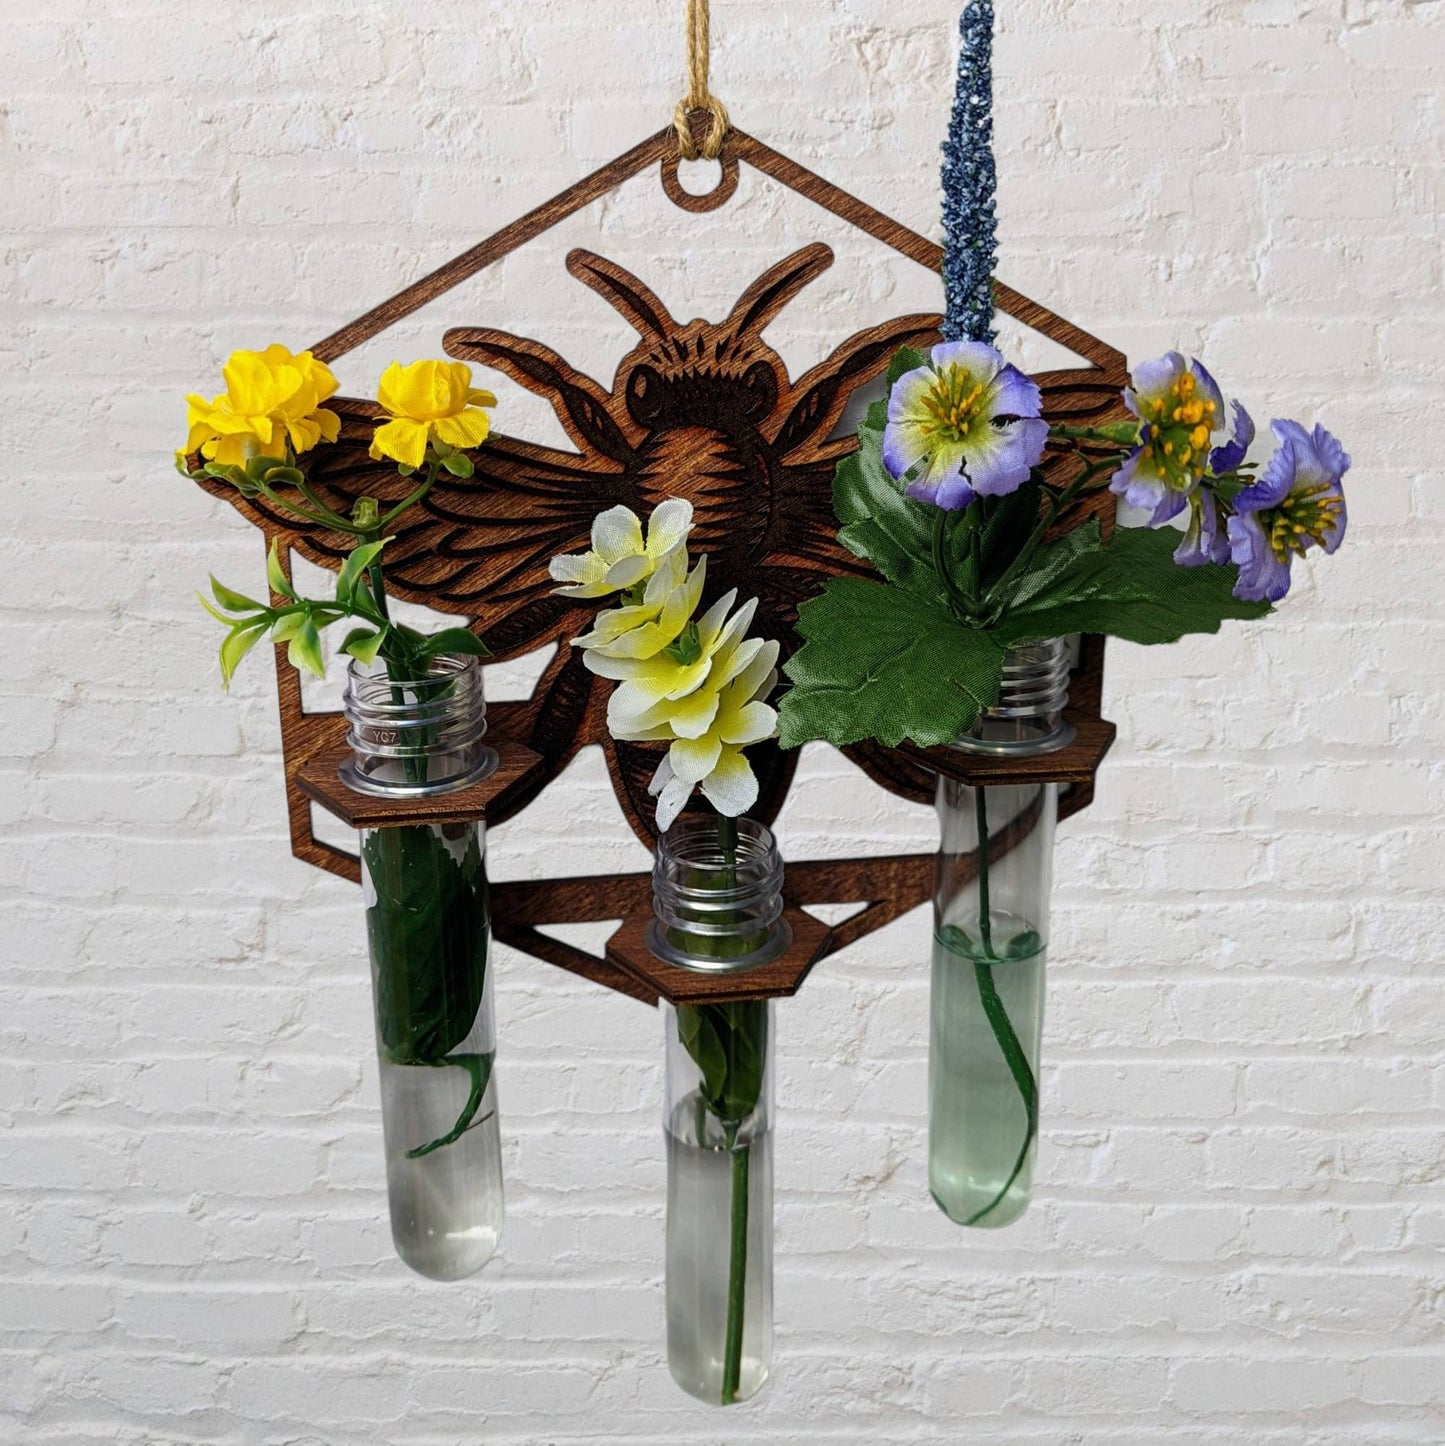 Honeybee wall hanging propagation station. Minimalist gift for mom. Gift for sister. Hanging vase. Wildflower, small House plants bees